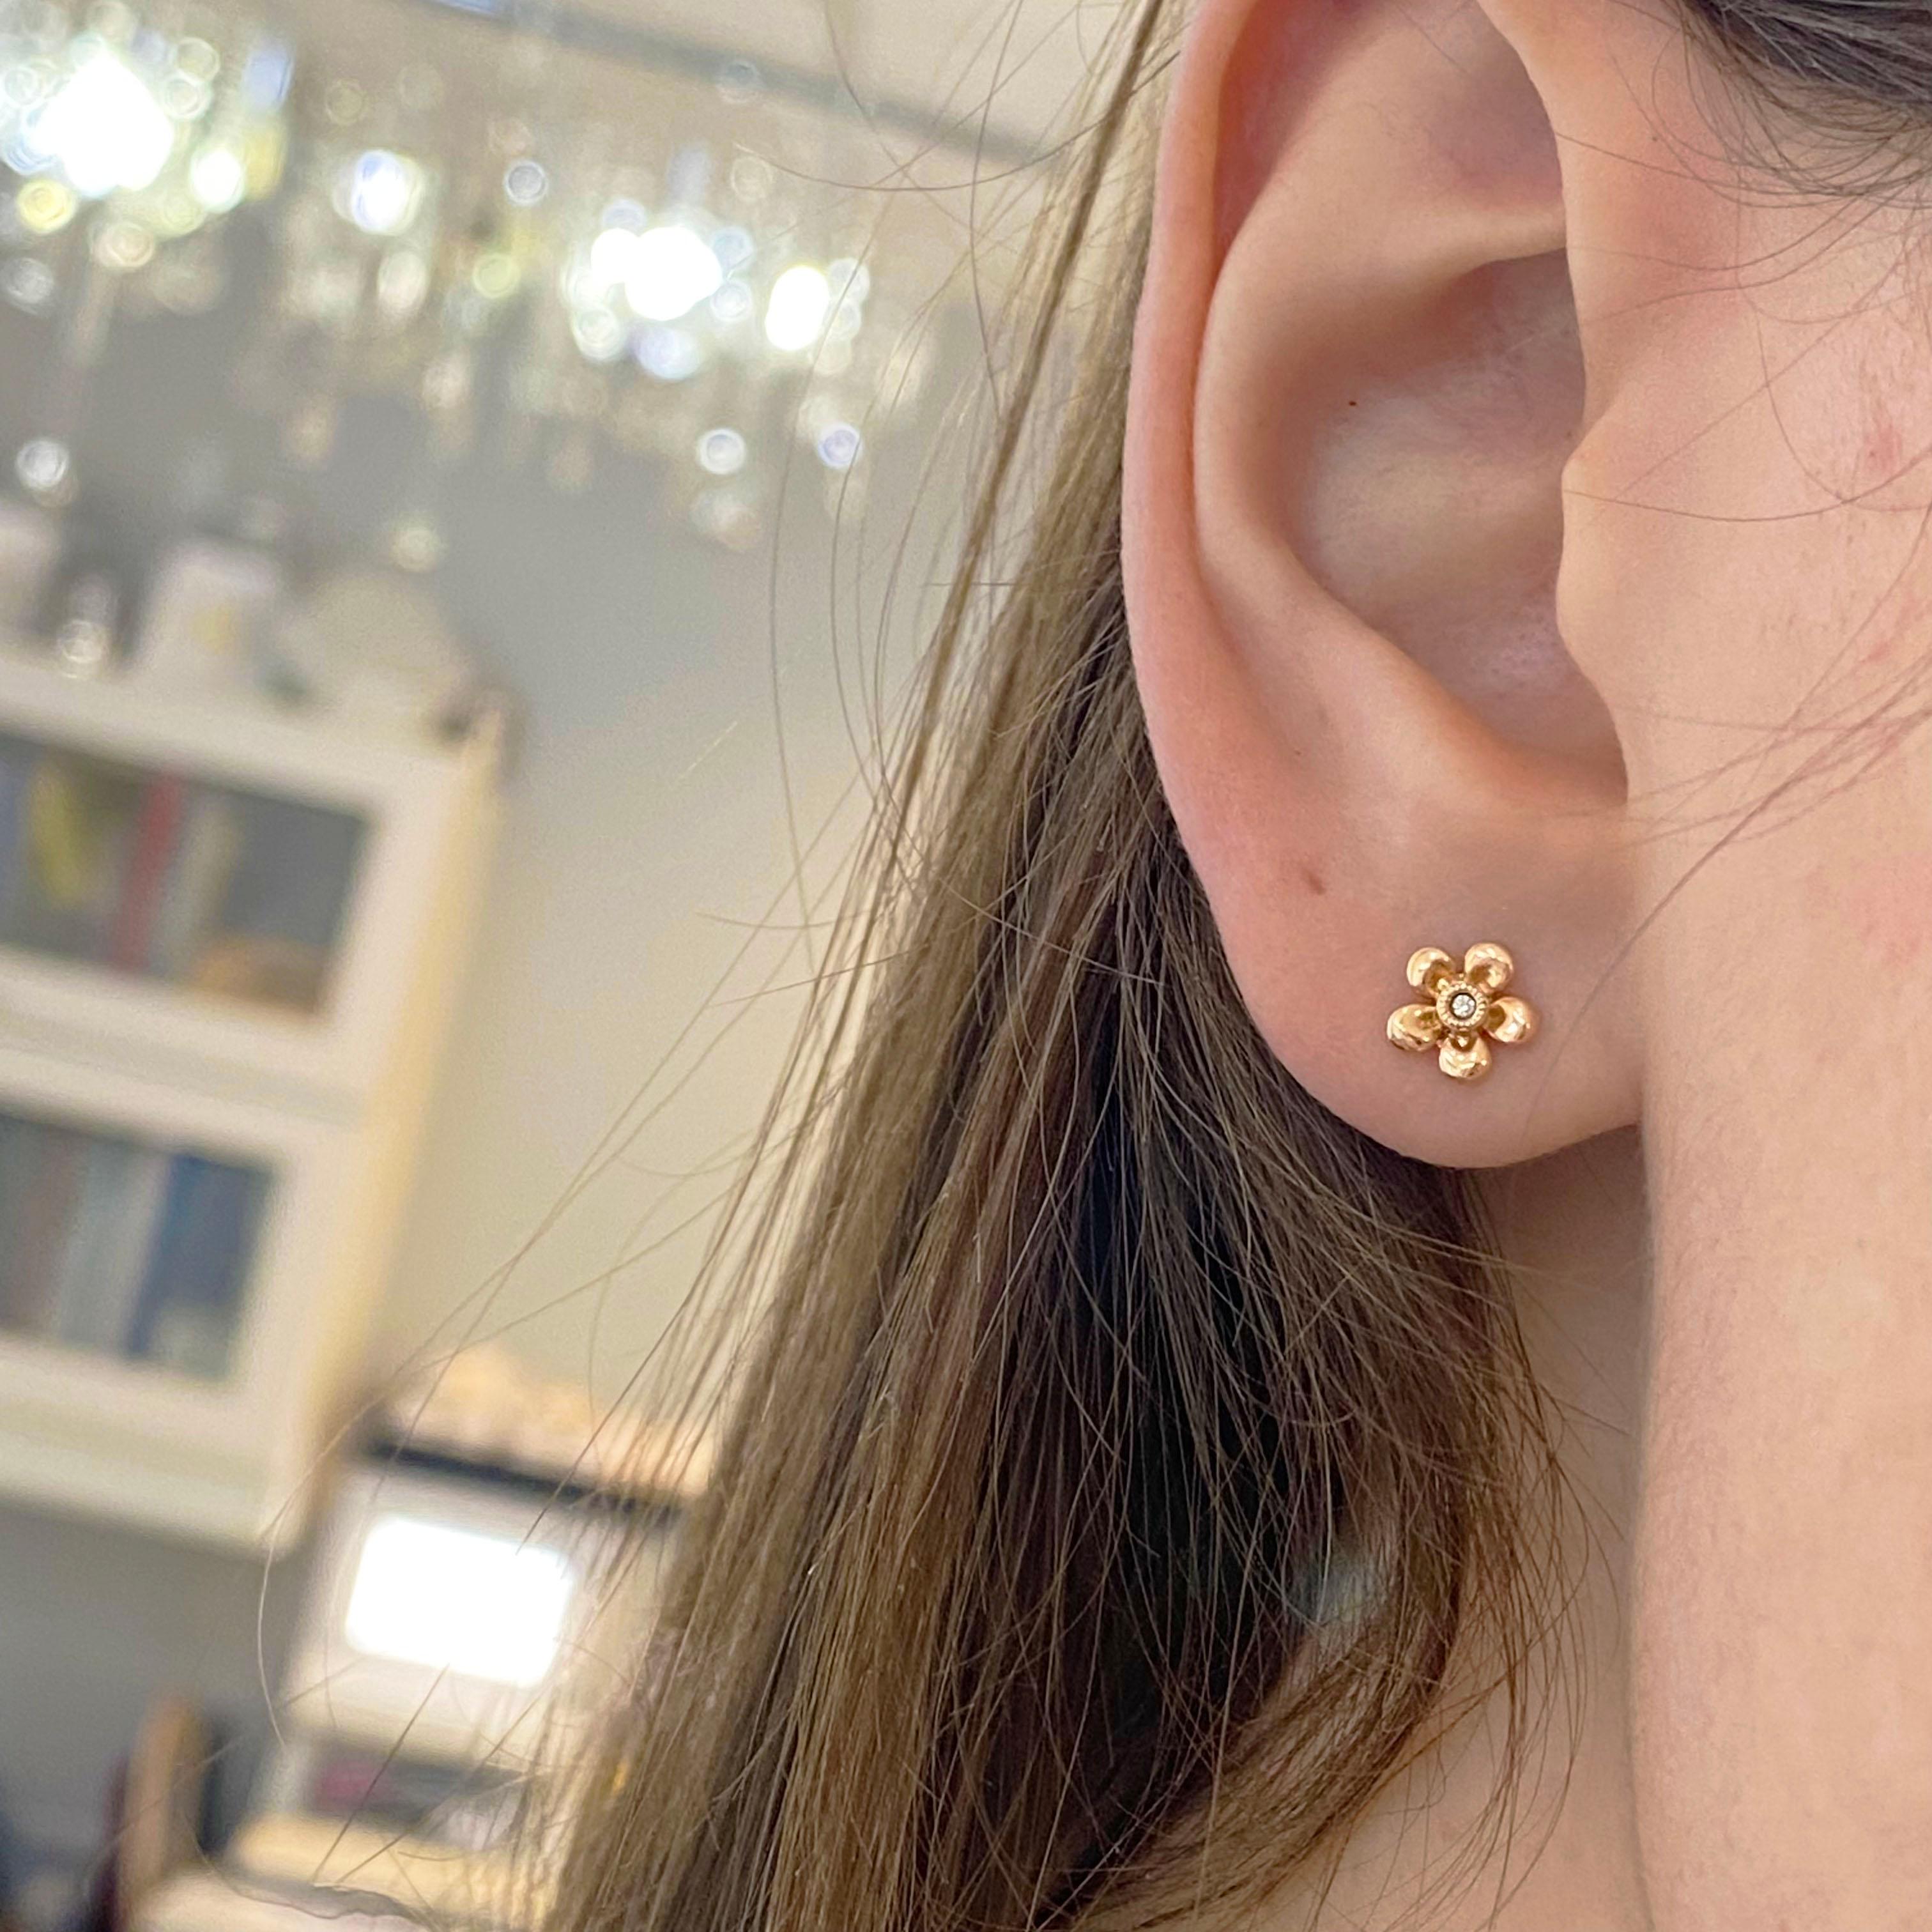 Rose gold earrings are so beautiful and this pair is in the shape of a flower with a center diamond brightening its sparkle. This minimalist look is precious on a delicate earlobe or when paired with multiple earrings. This is also our number one